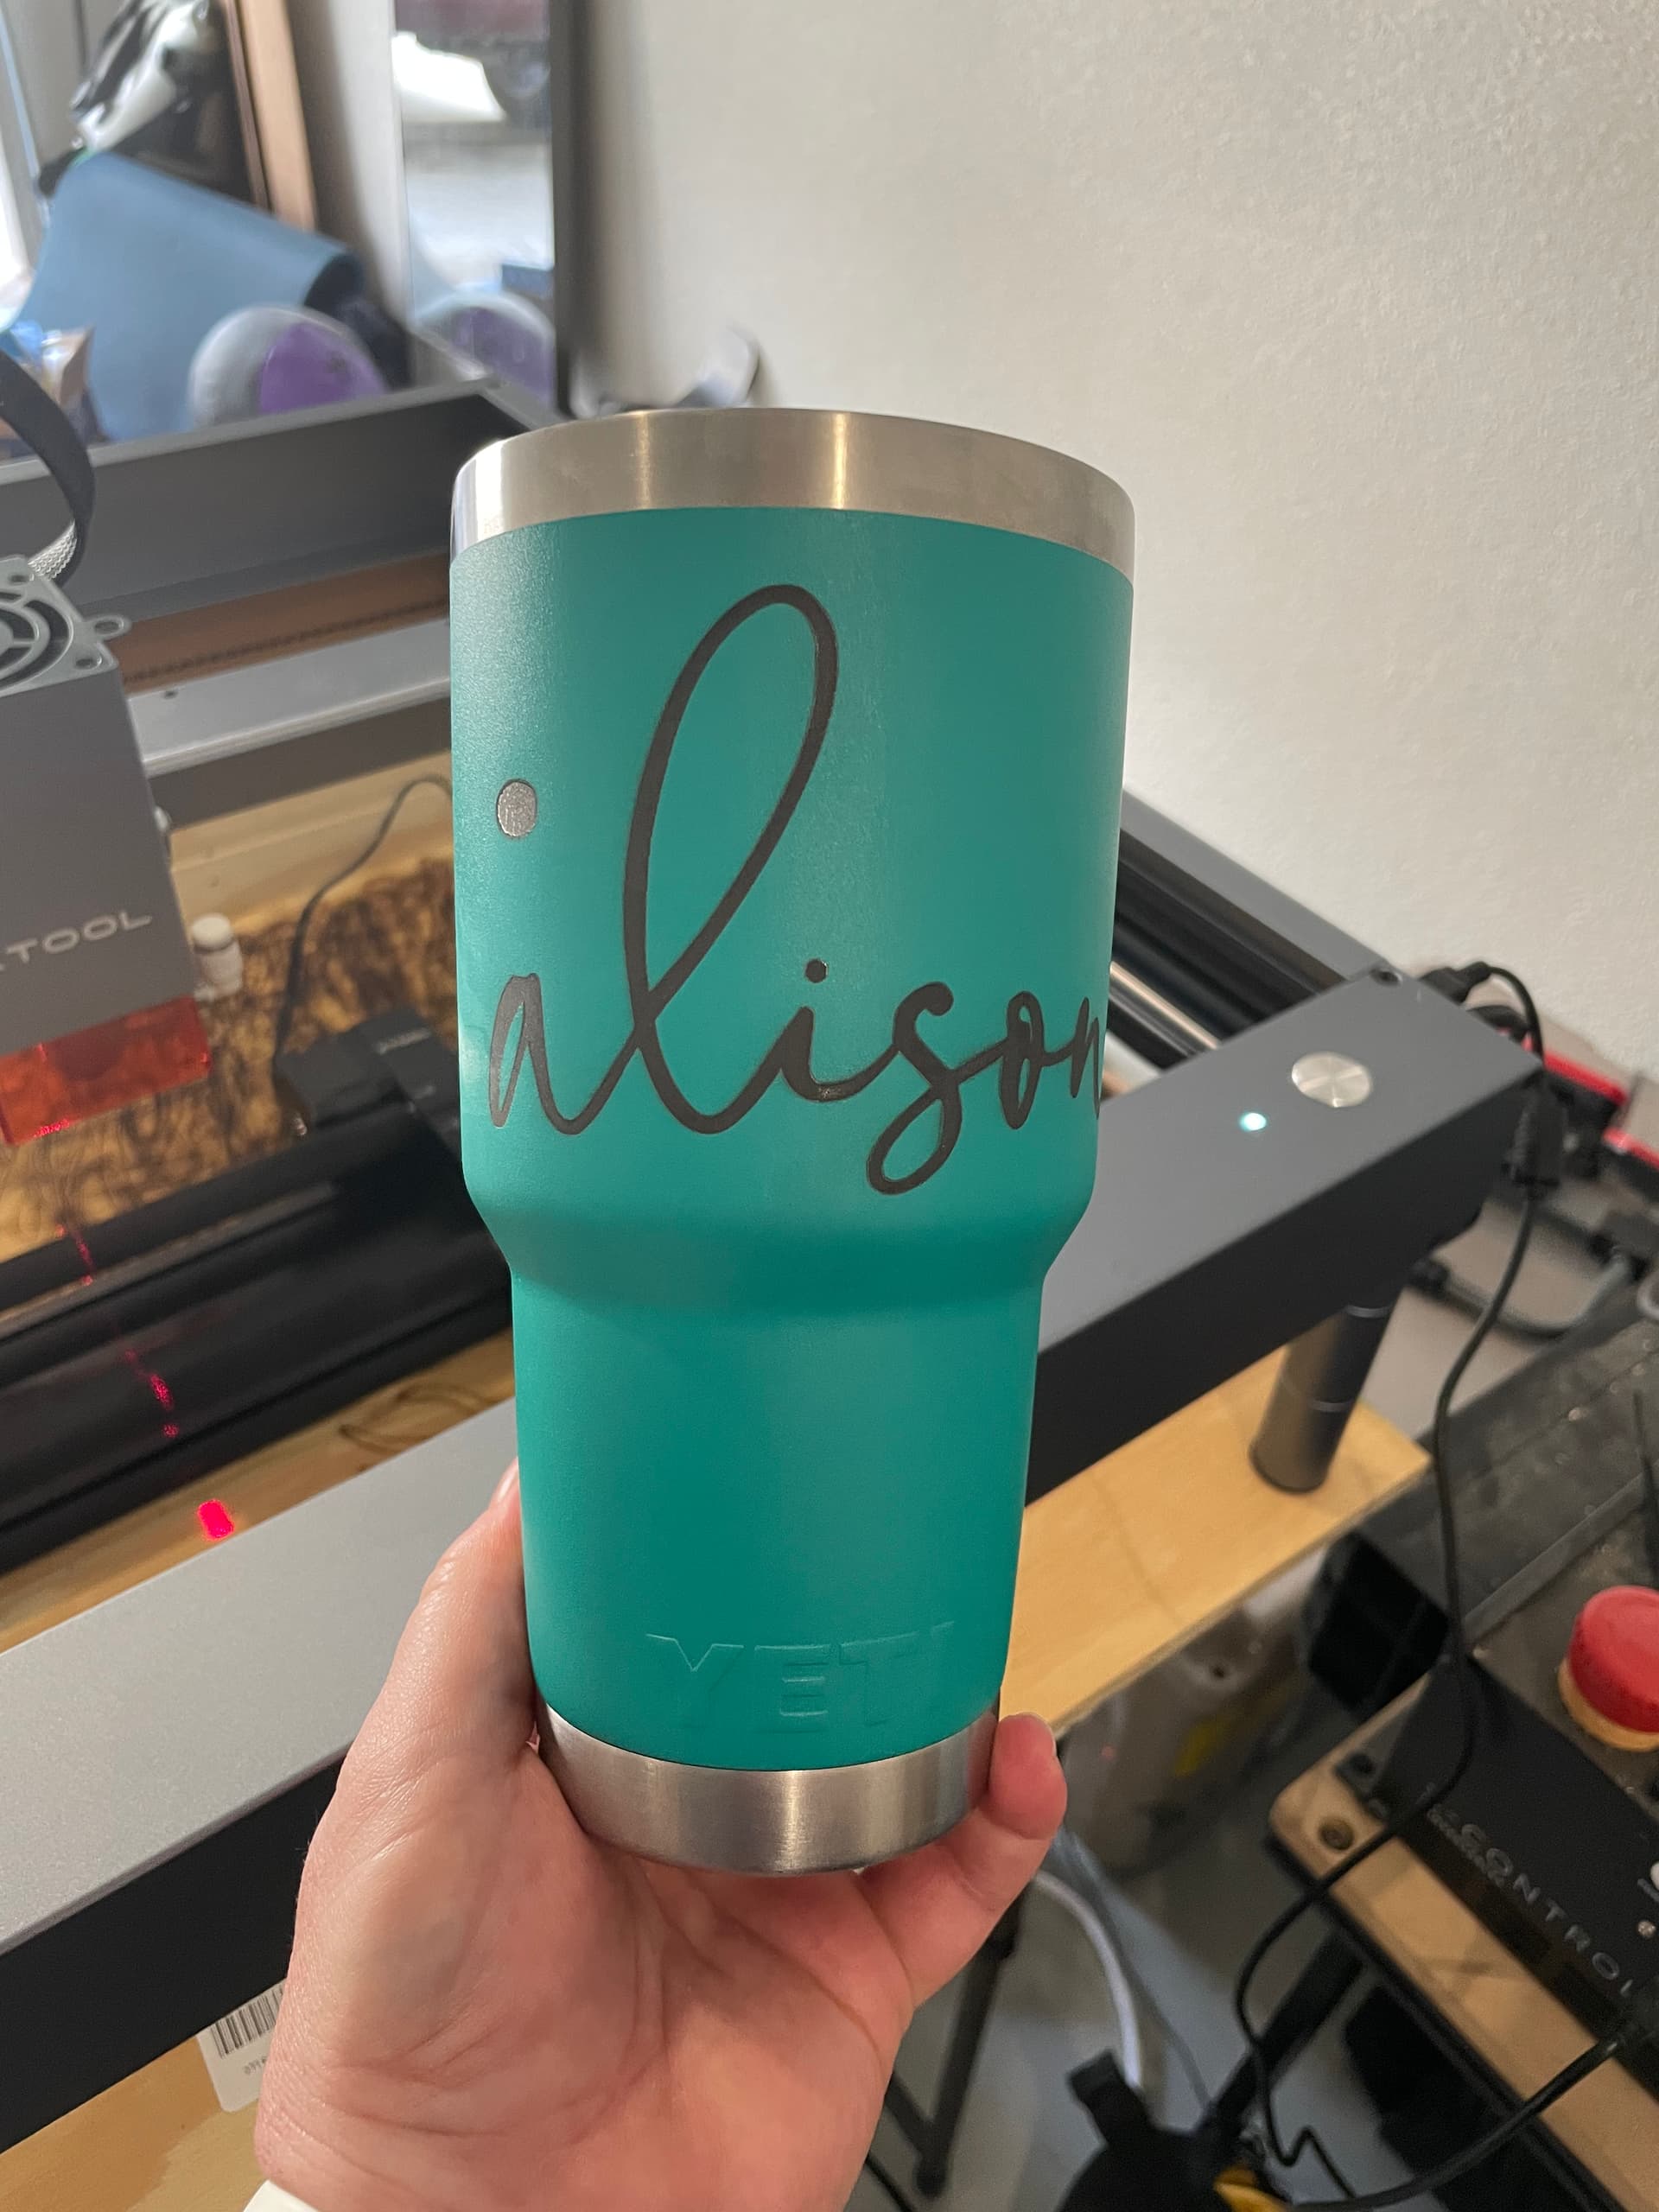 Yeti Laser Engraving: How to Laser Engrave a Yeti Cup - xTool